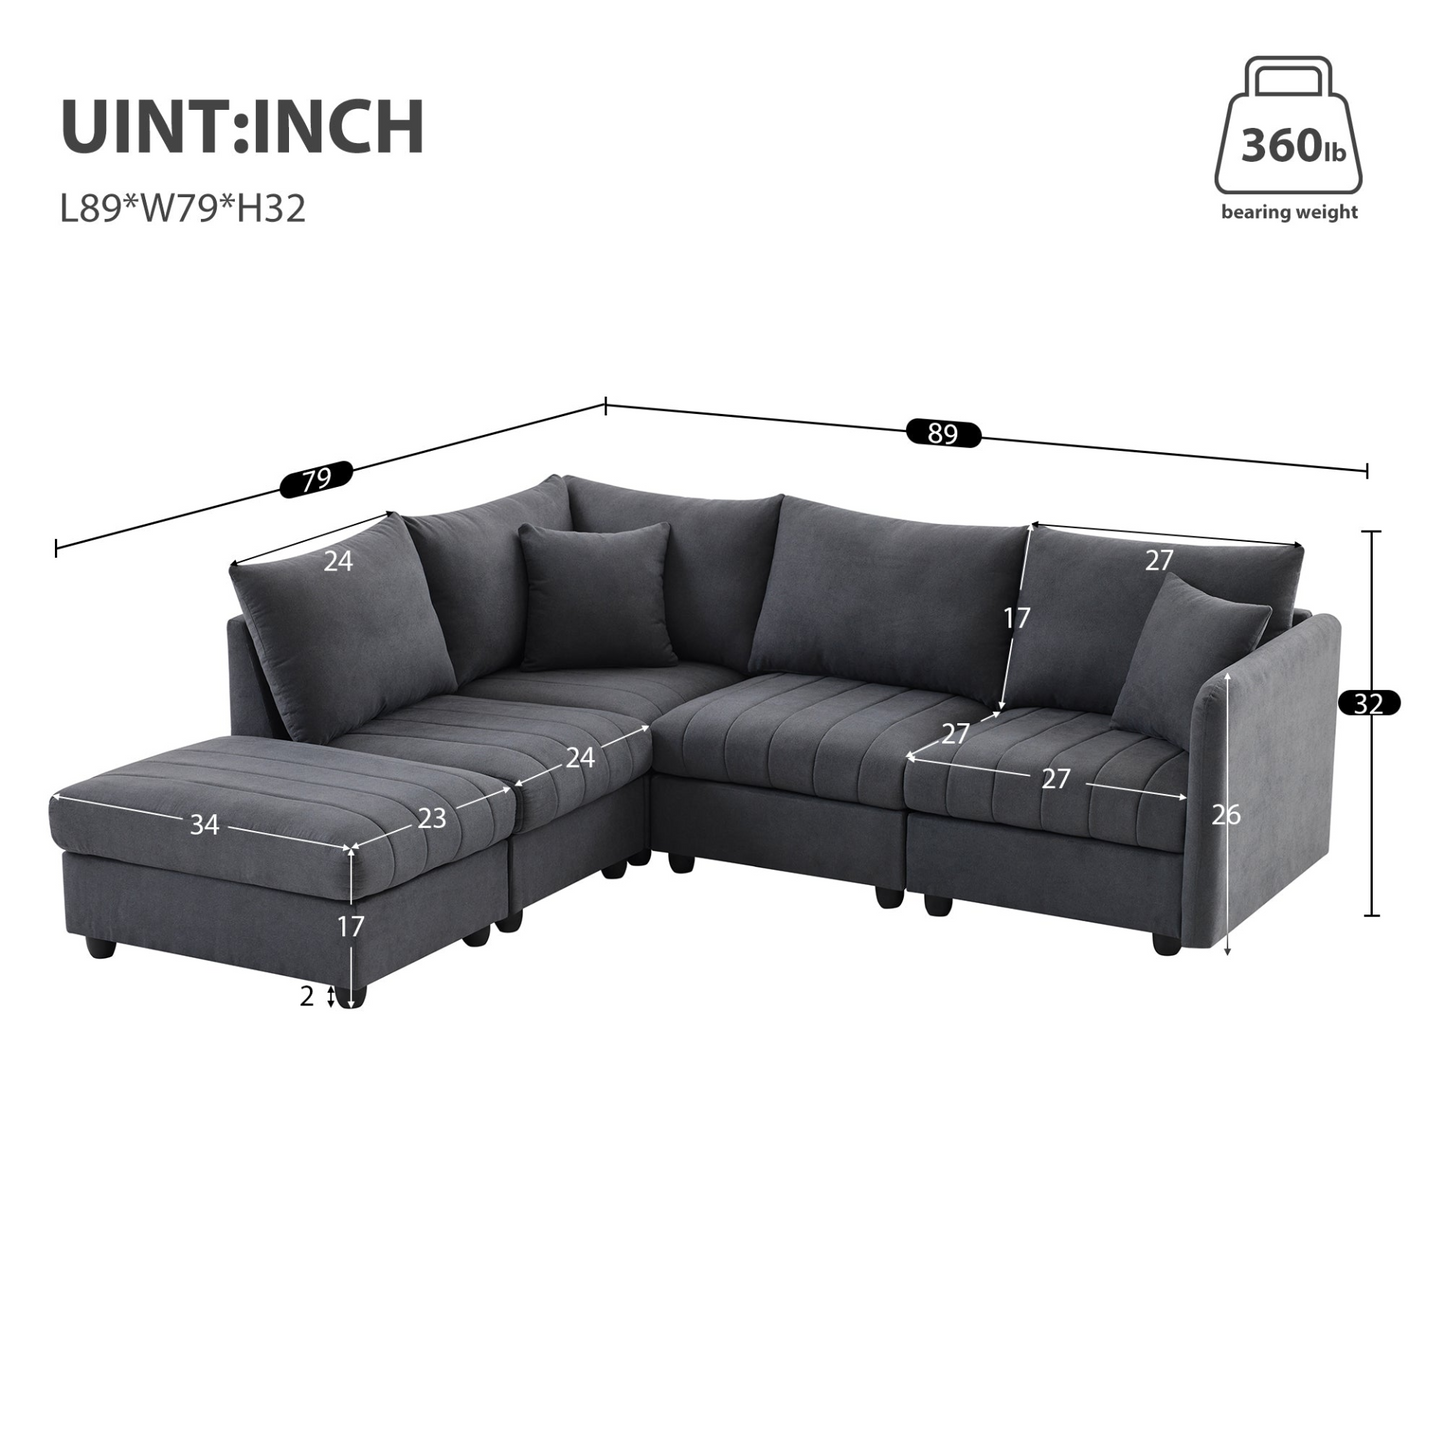 89*79"Modern Sectional Sofa with Vertical Stripes,2 Pillows,5-Seat Couch with Convertible Ottoman,Various Combinations,L-Shape Indoor Furniture for Living Room,Apartment, 3 Colors, Goodies N Stuff